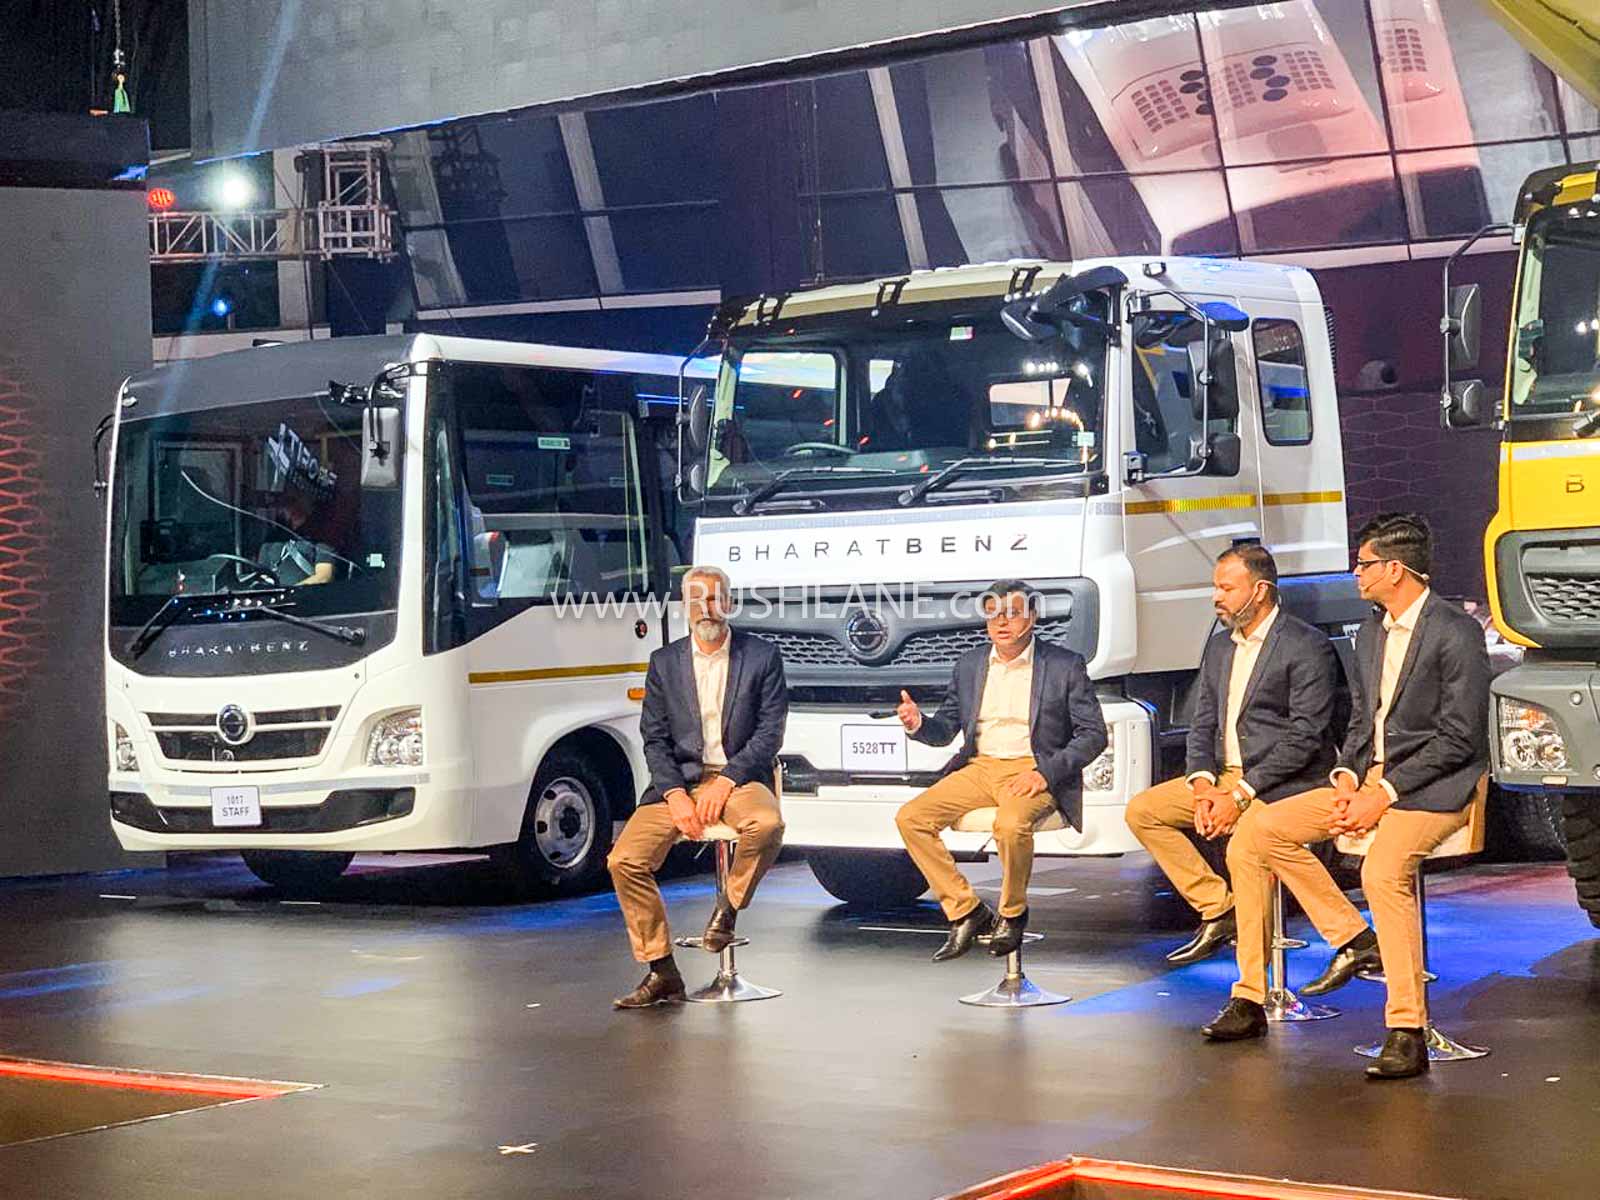 2020 Daimler Bharat Benz Trucks and Buses launch